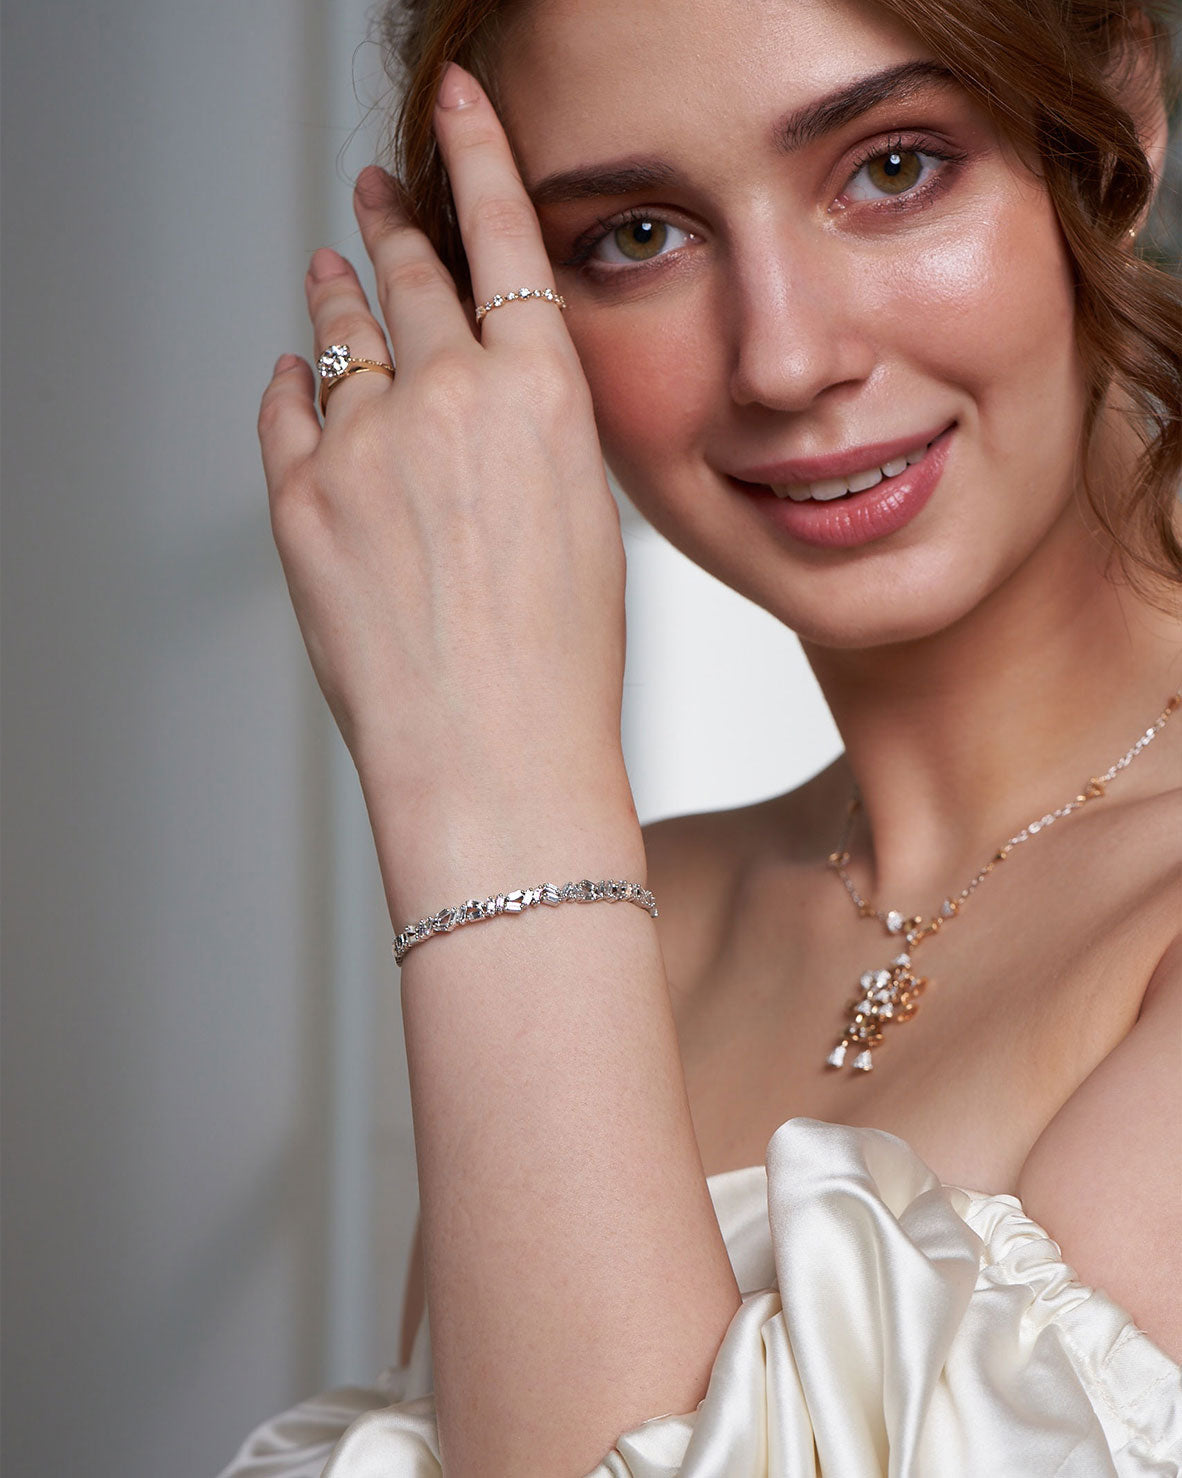 Shine Bright with Our Beautiful Diamond Rings